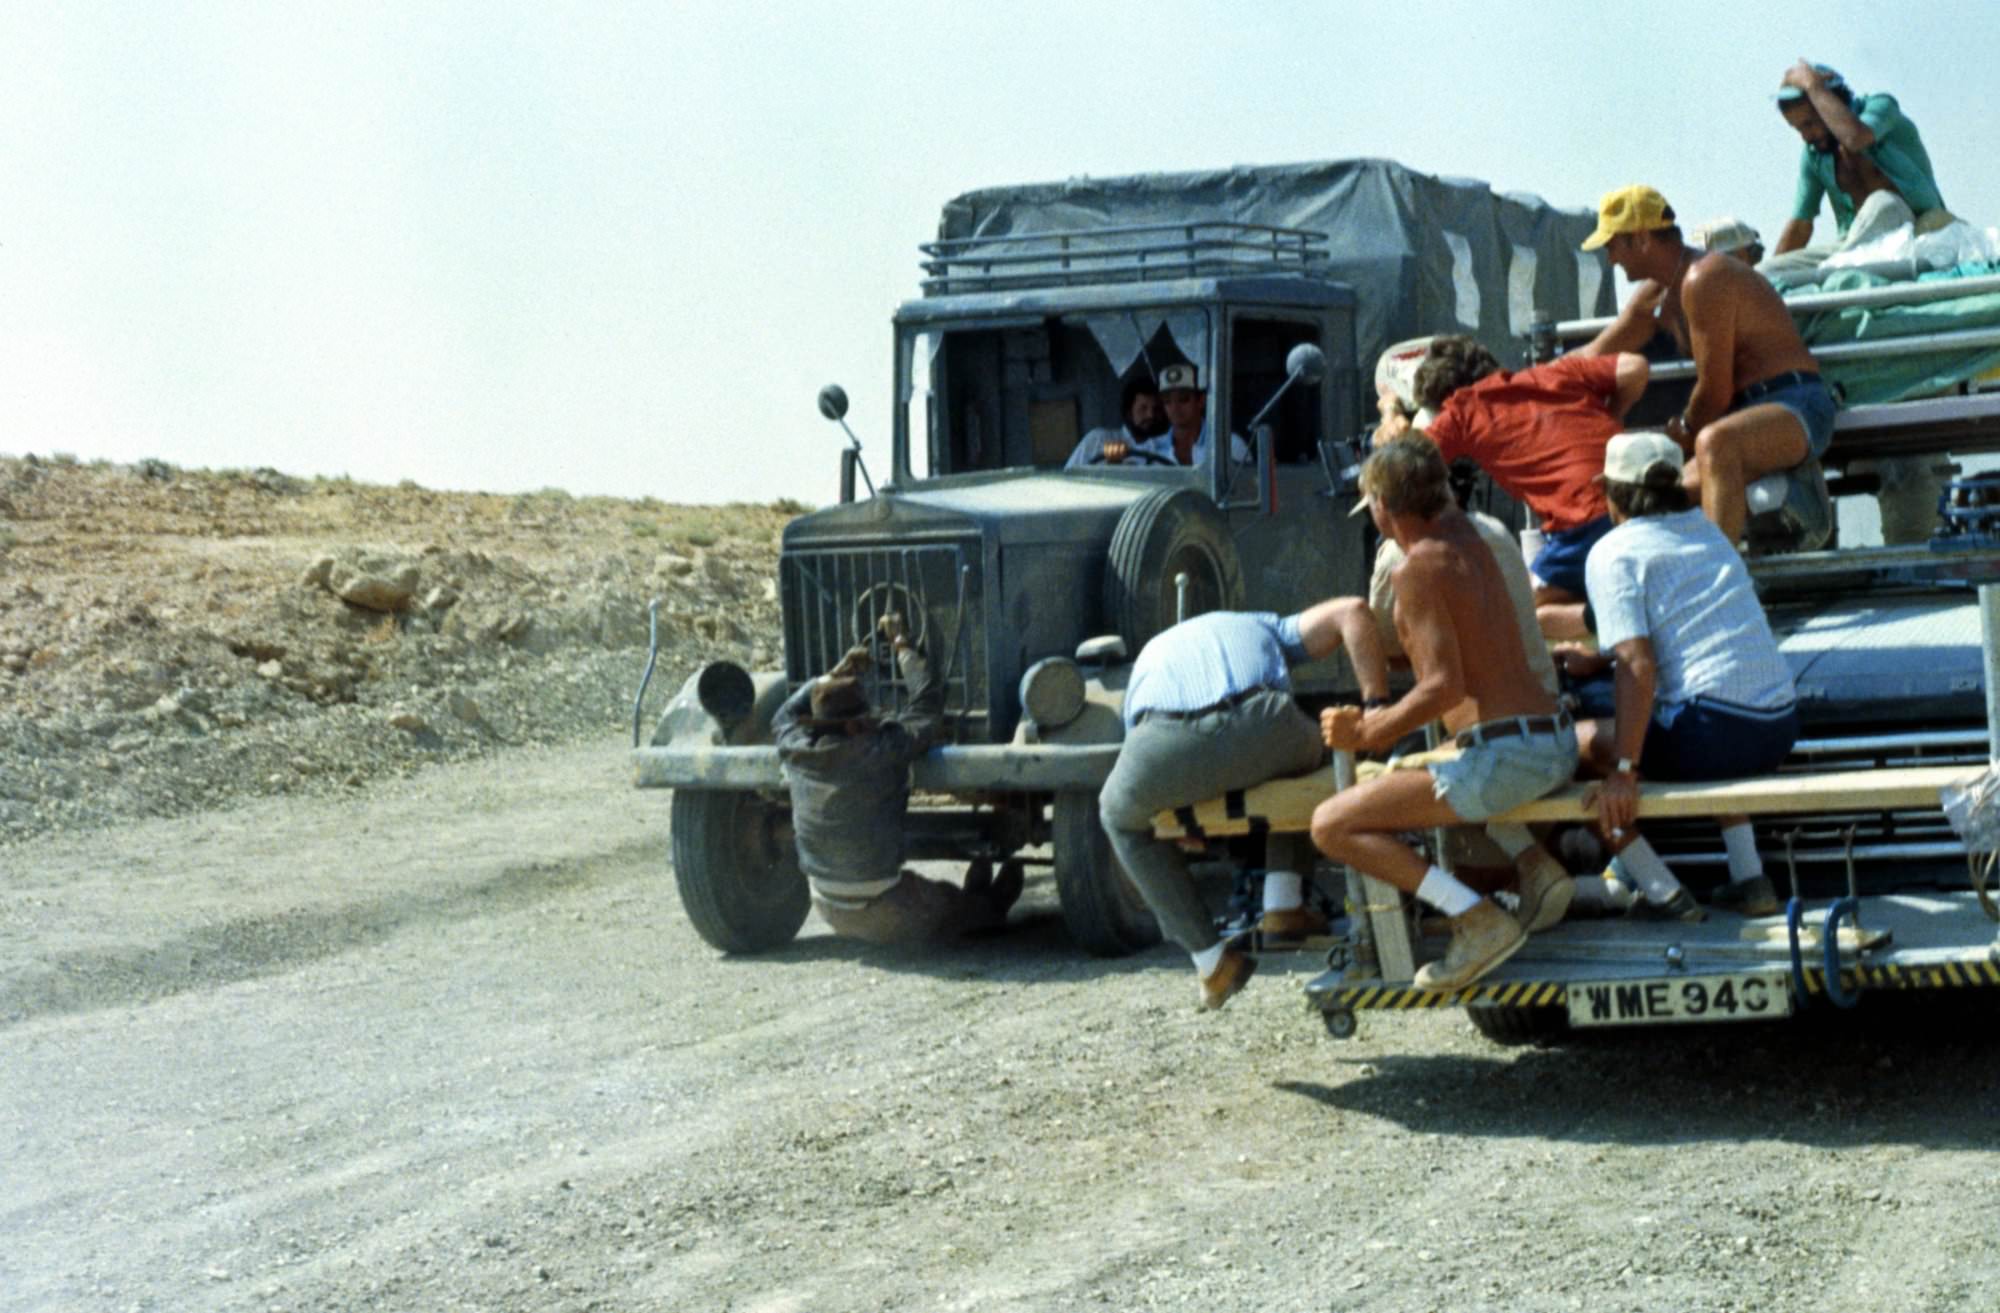 Crew members work to create a stunt with Harrison Ford who did most of his own stunts in the film Raiders of the Lost Ark (1981).